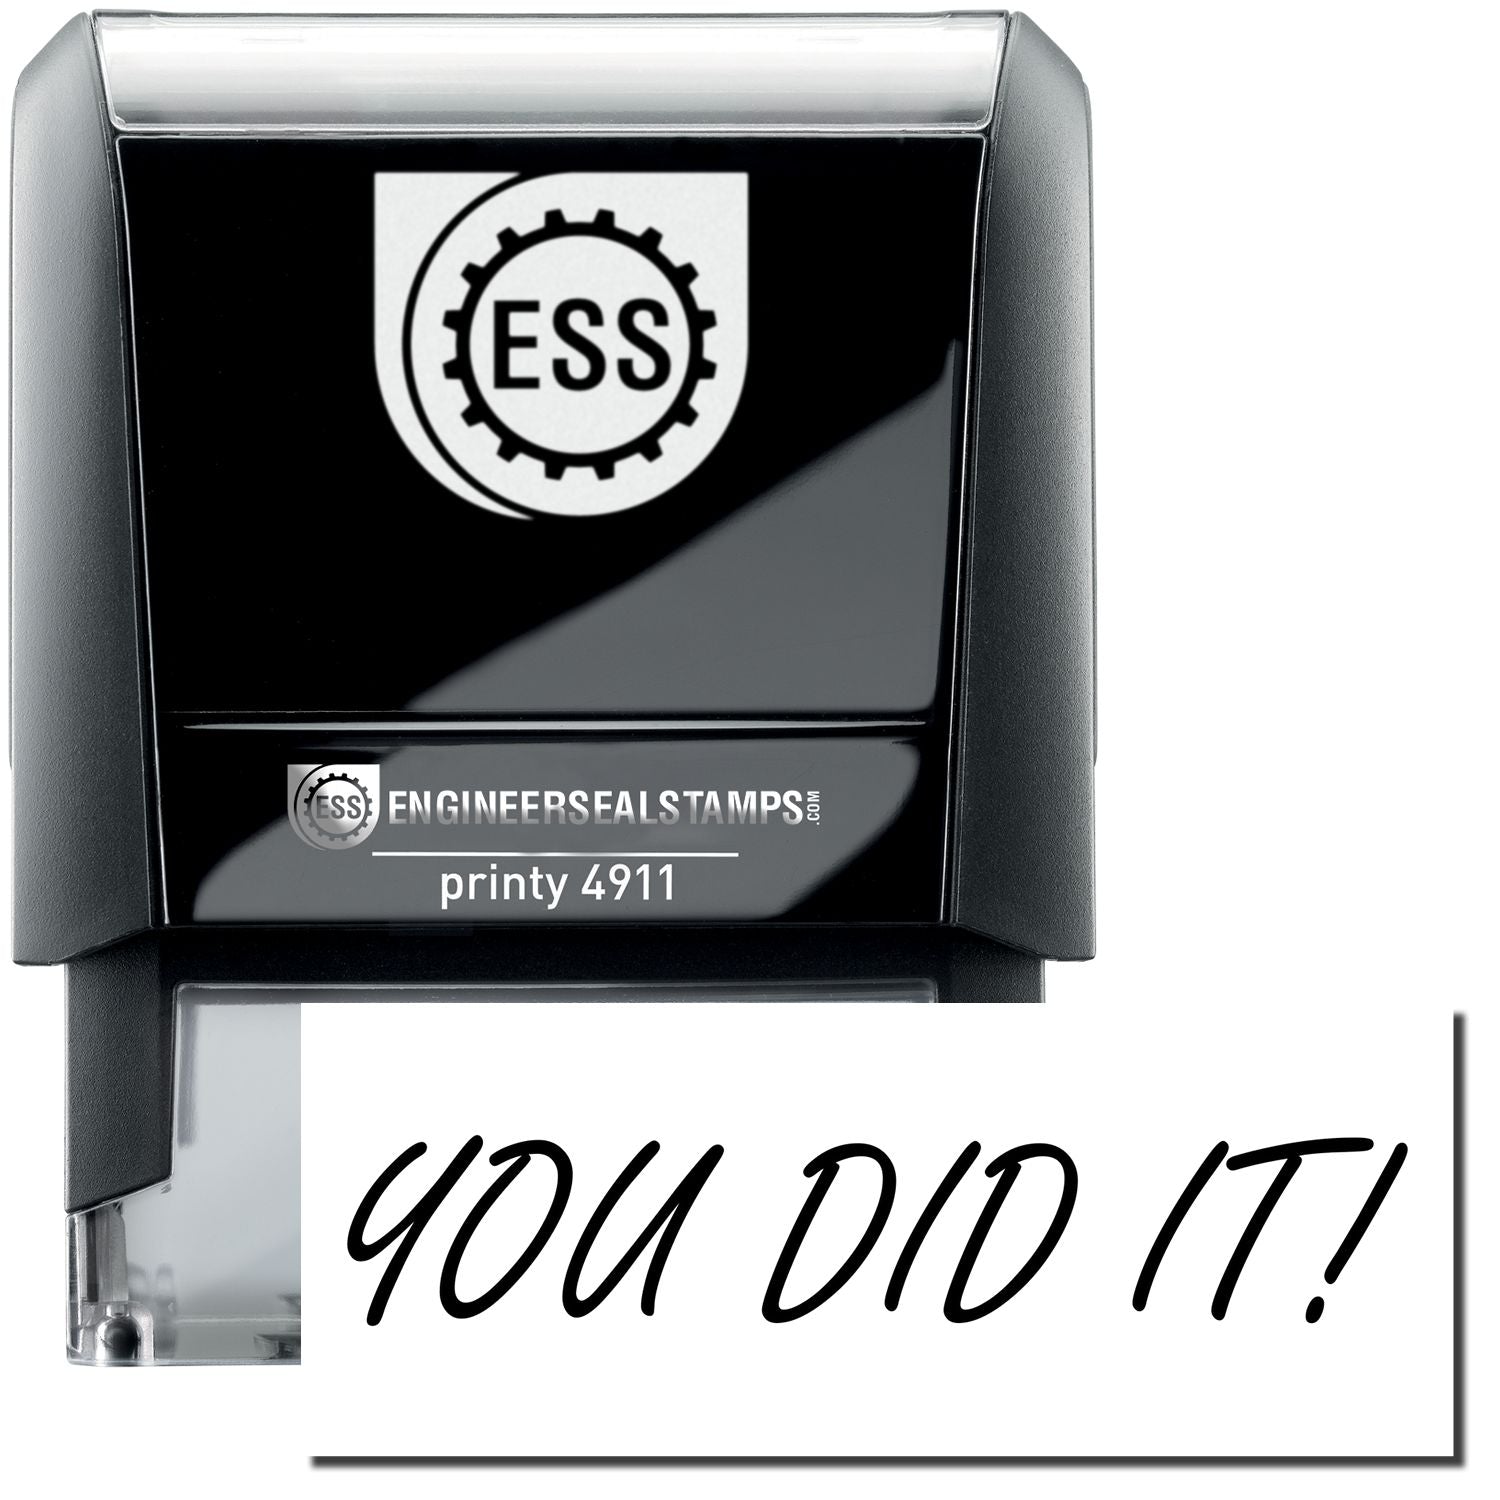 A self-inking stamp with a stamped image showing how the text "YOU DID IT!" is displayed after stamping.